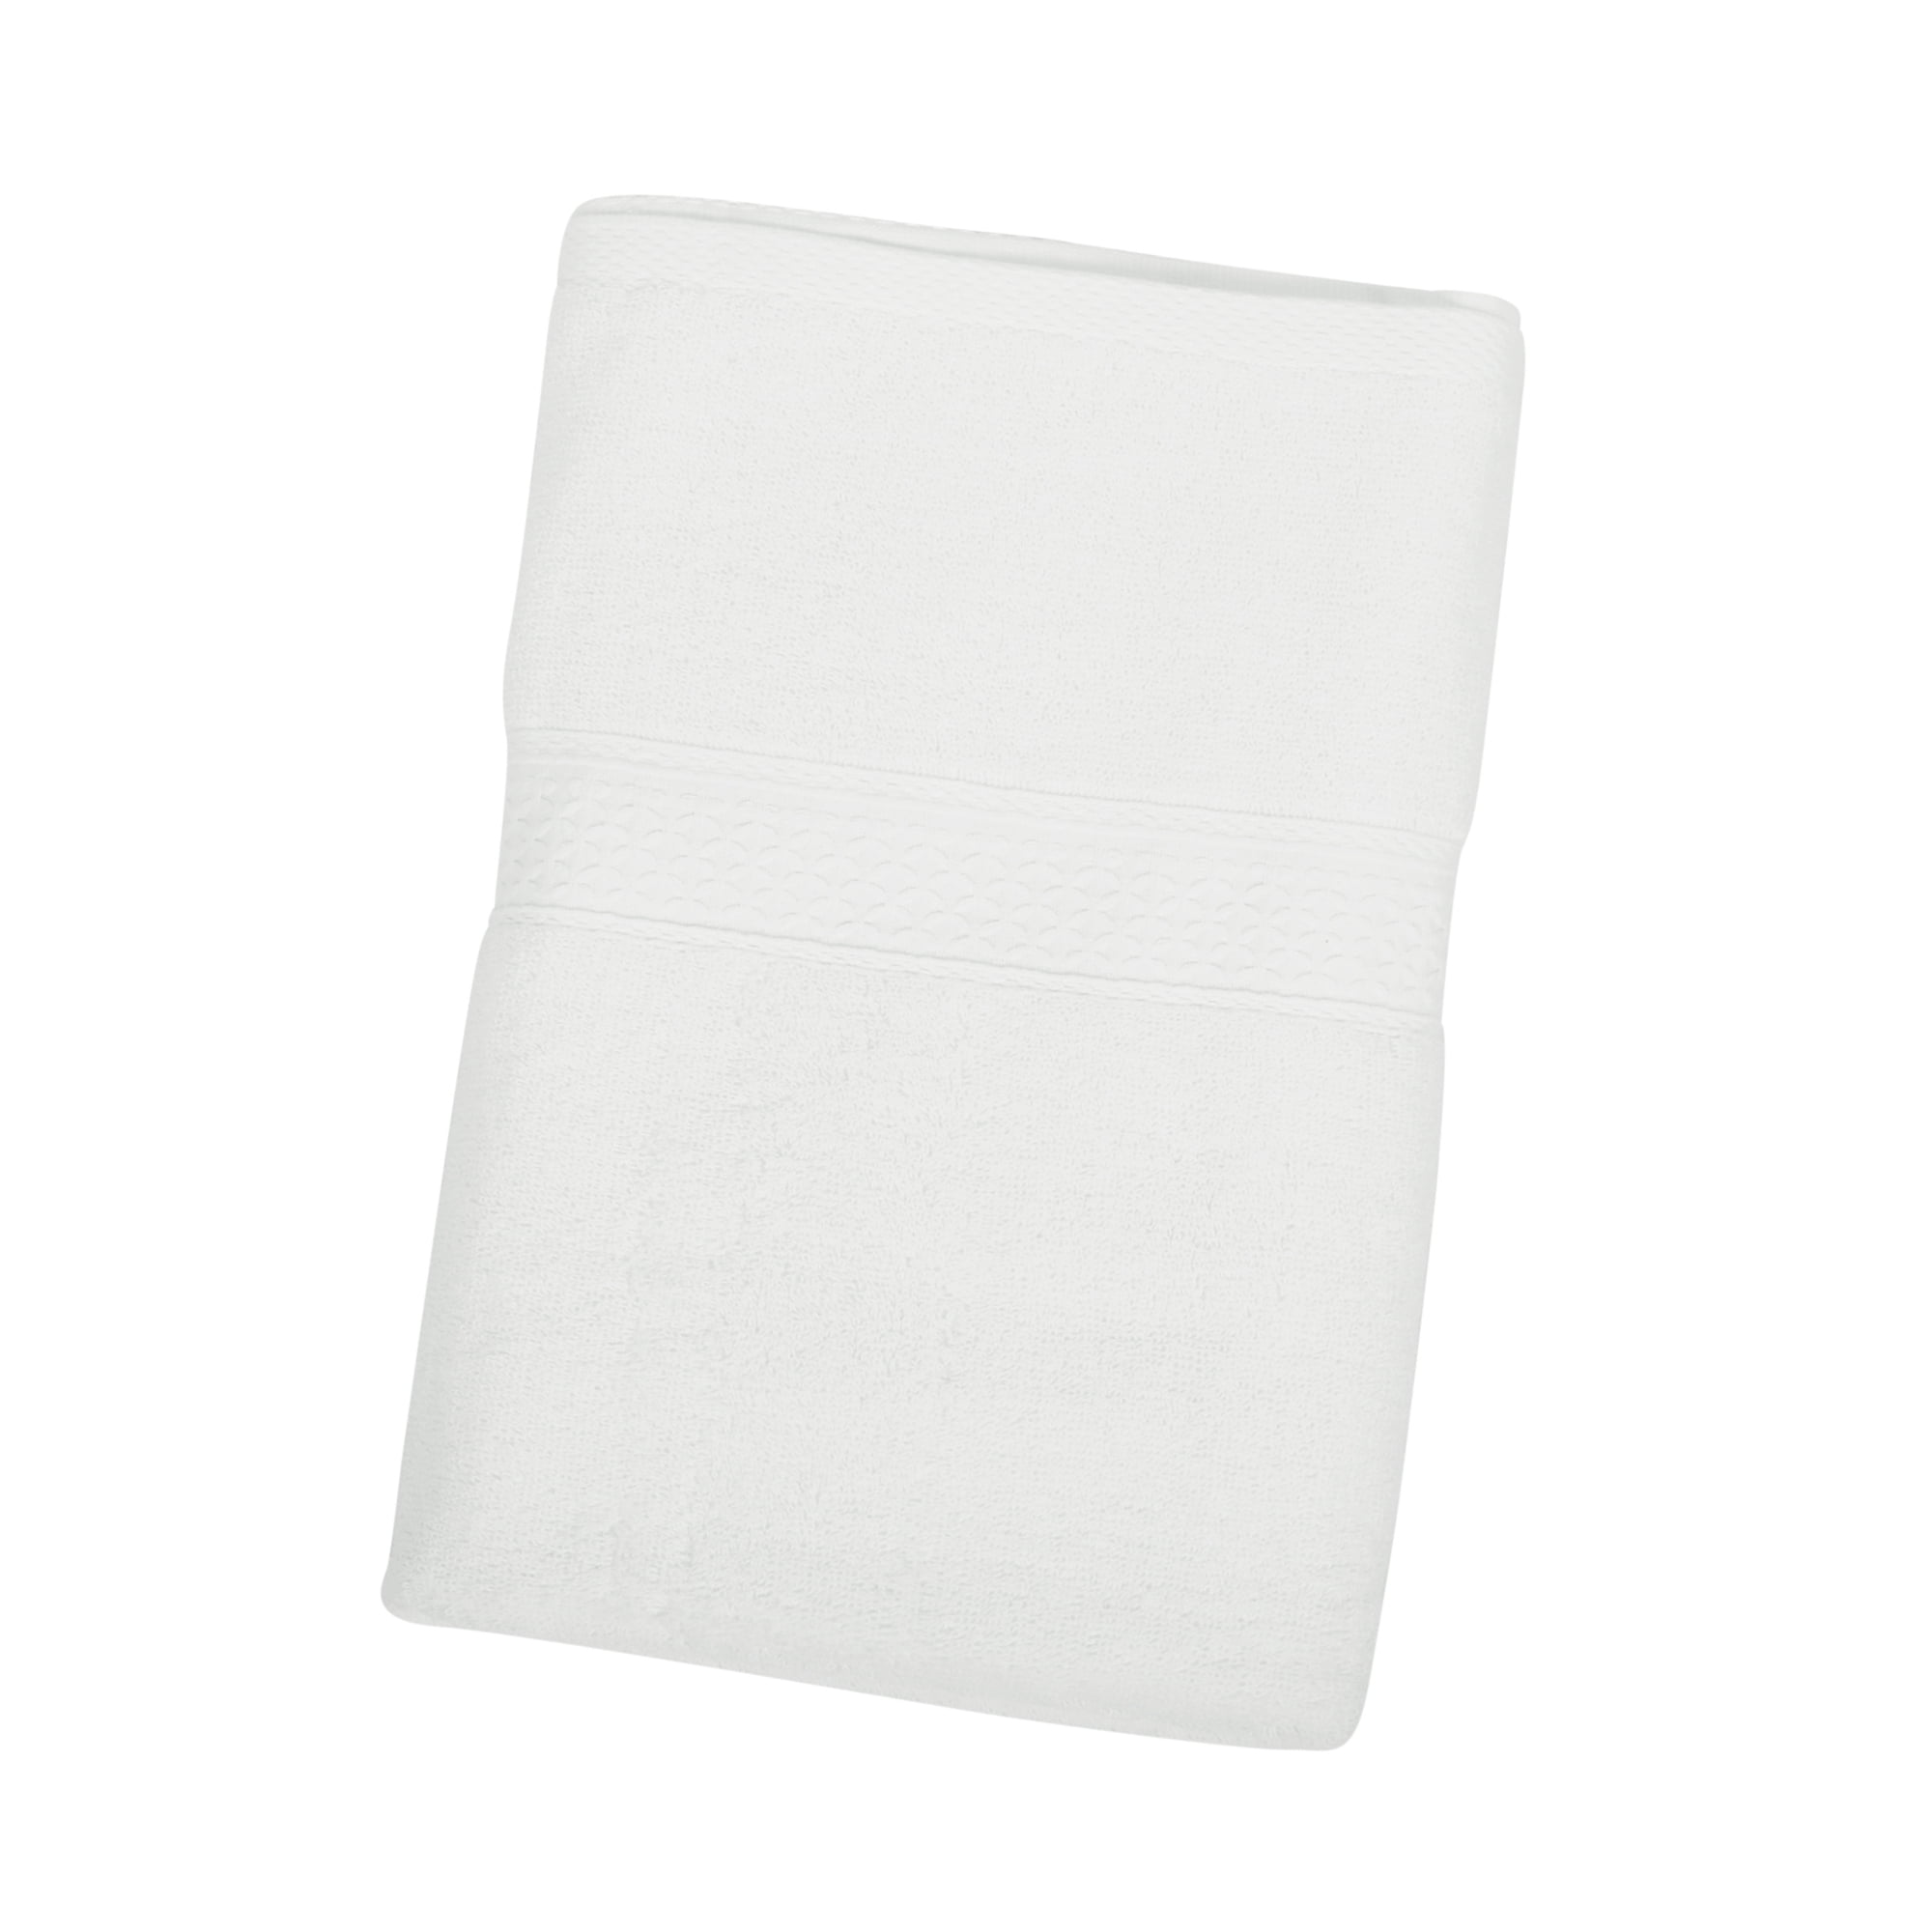 Unique Bargains 1pc Soft Absorbent Bath Towel Elastic Band White 55.12 inchx30.31 inch for Bathroom with Adjustable Button, Adult Unisex, Size: One